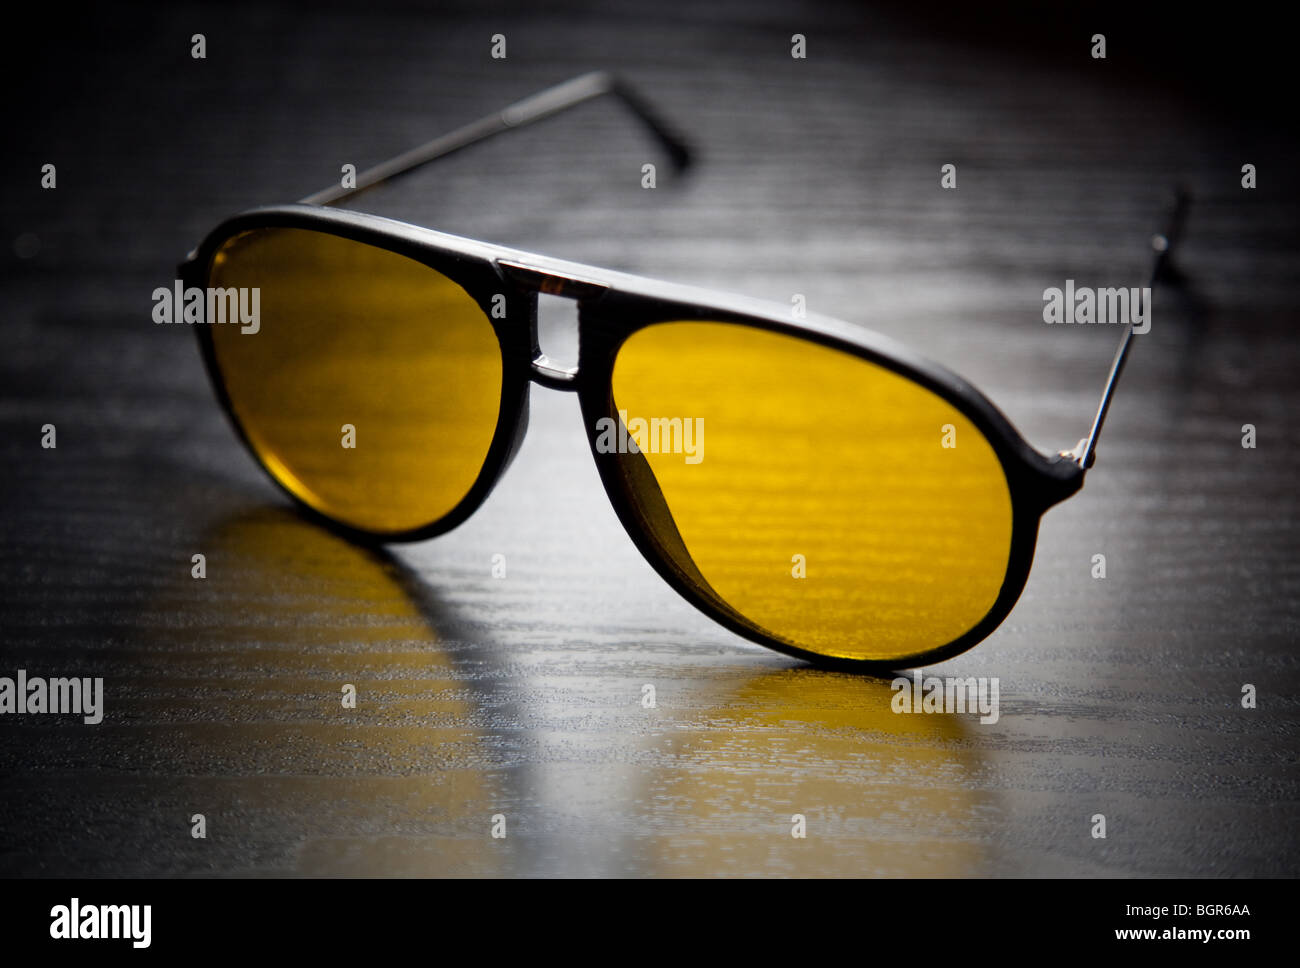 A pair of cool yellow lens sunglasses on a shiny black table Stock Photo